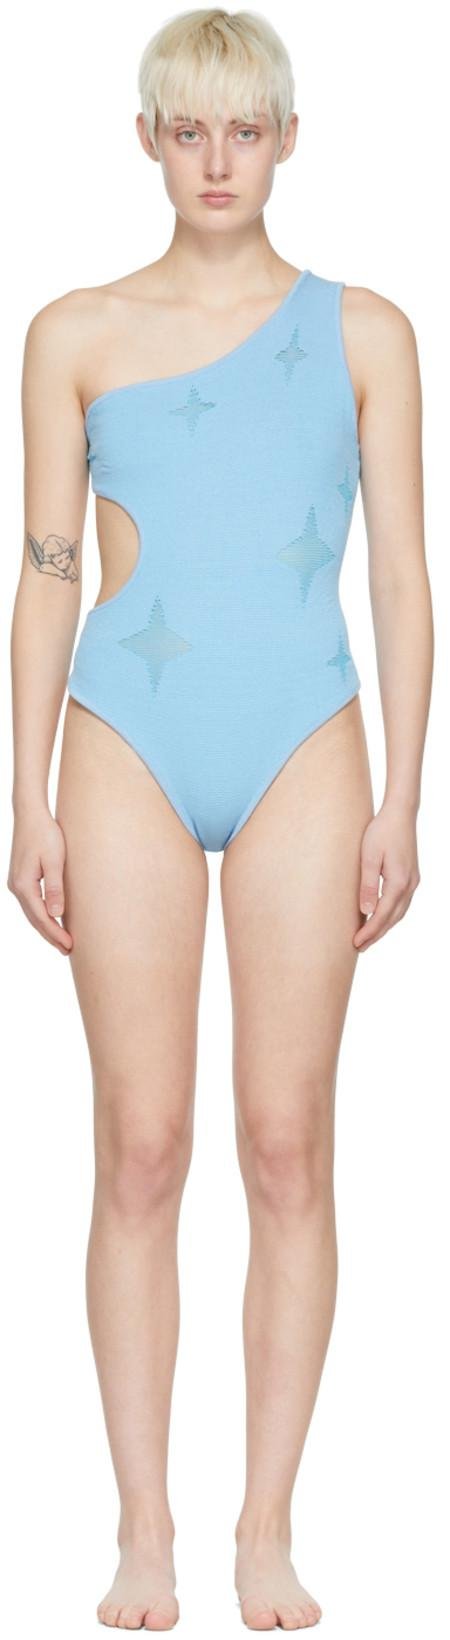 SSENSE Exclusive Blue Twilight One-Piece Swimsuit by CHET LO